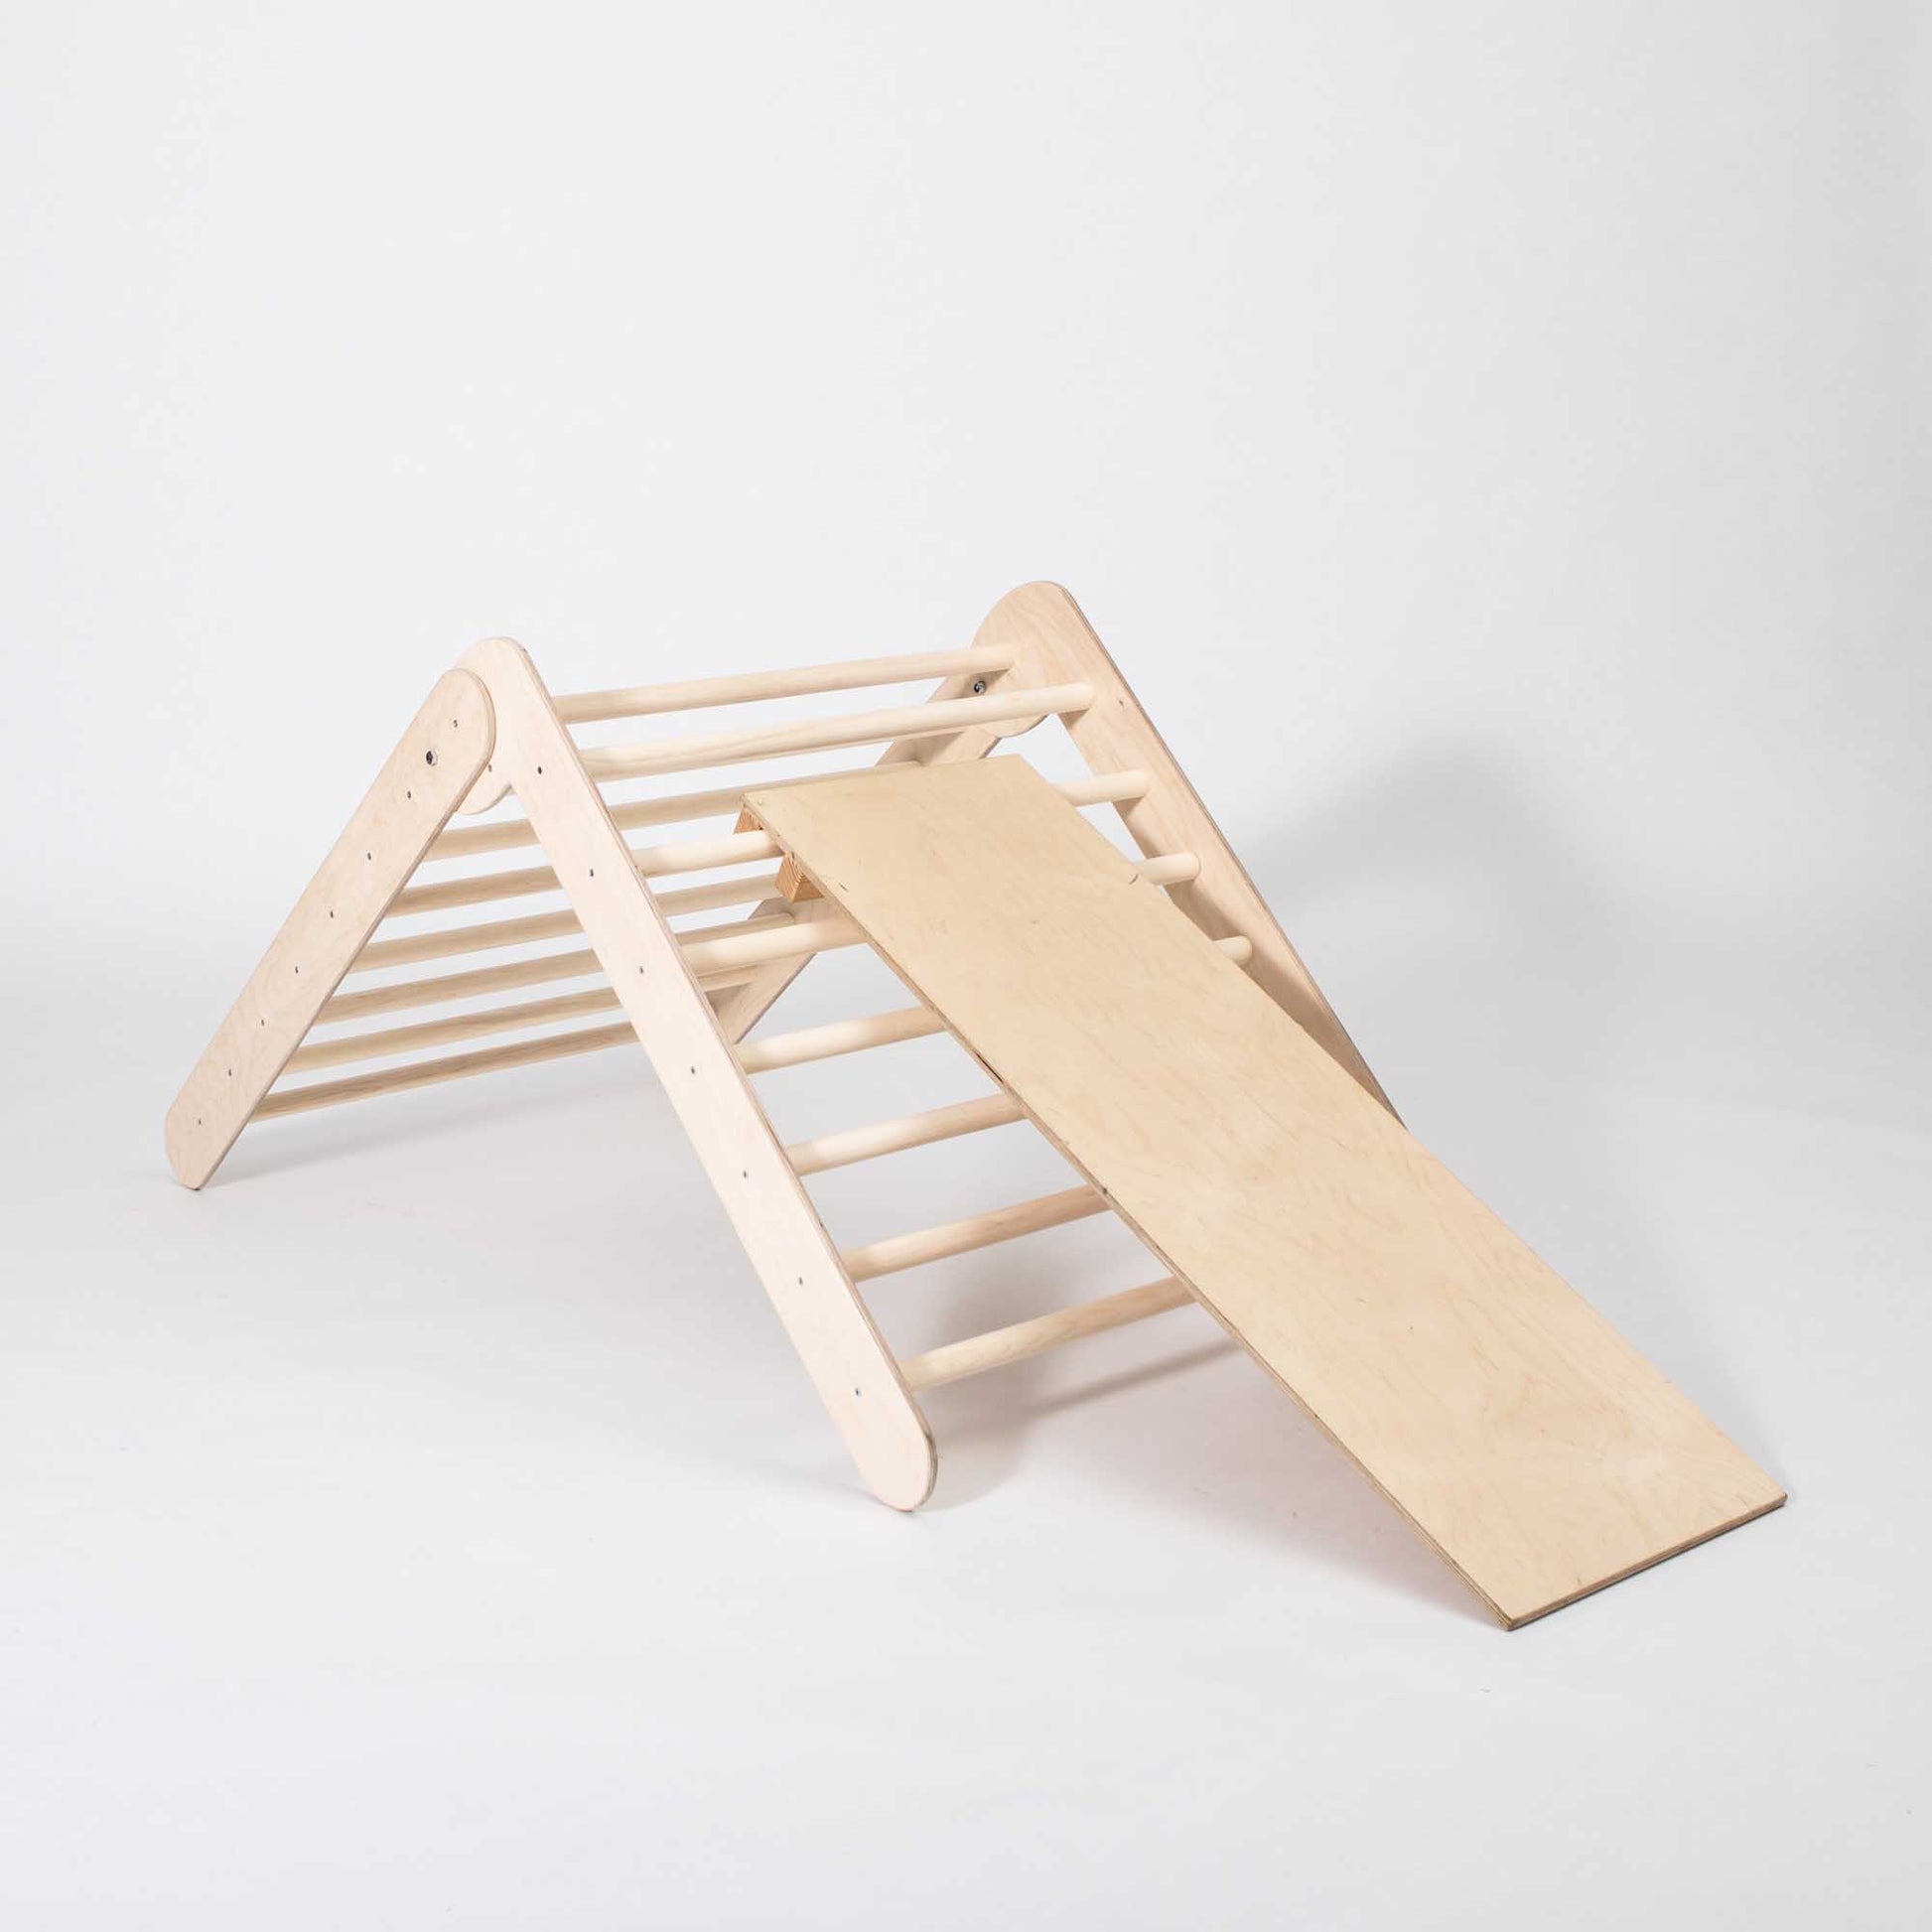 A Foldable climbing triangle with 2 slope levels, perfect for developing motor skills.